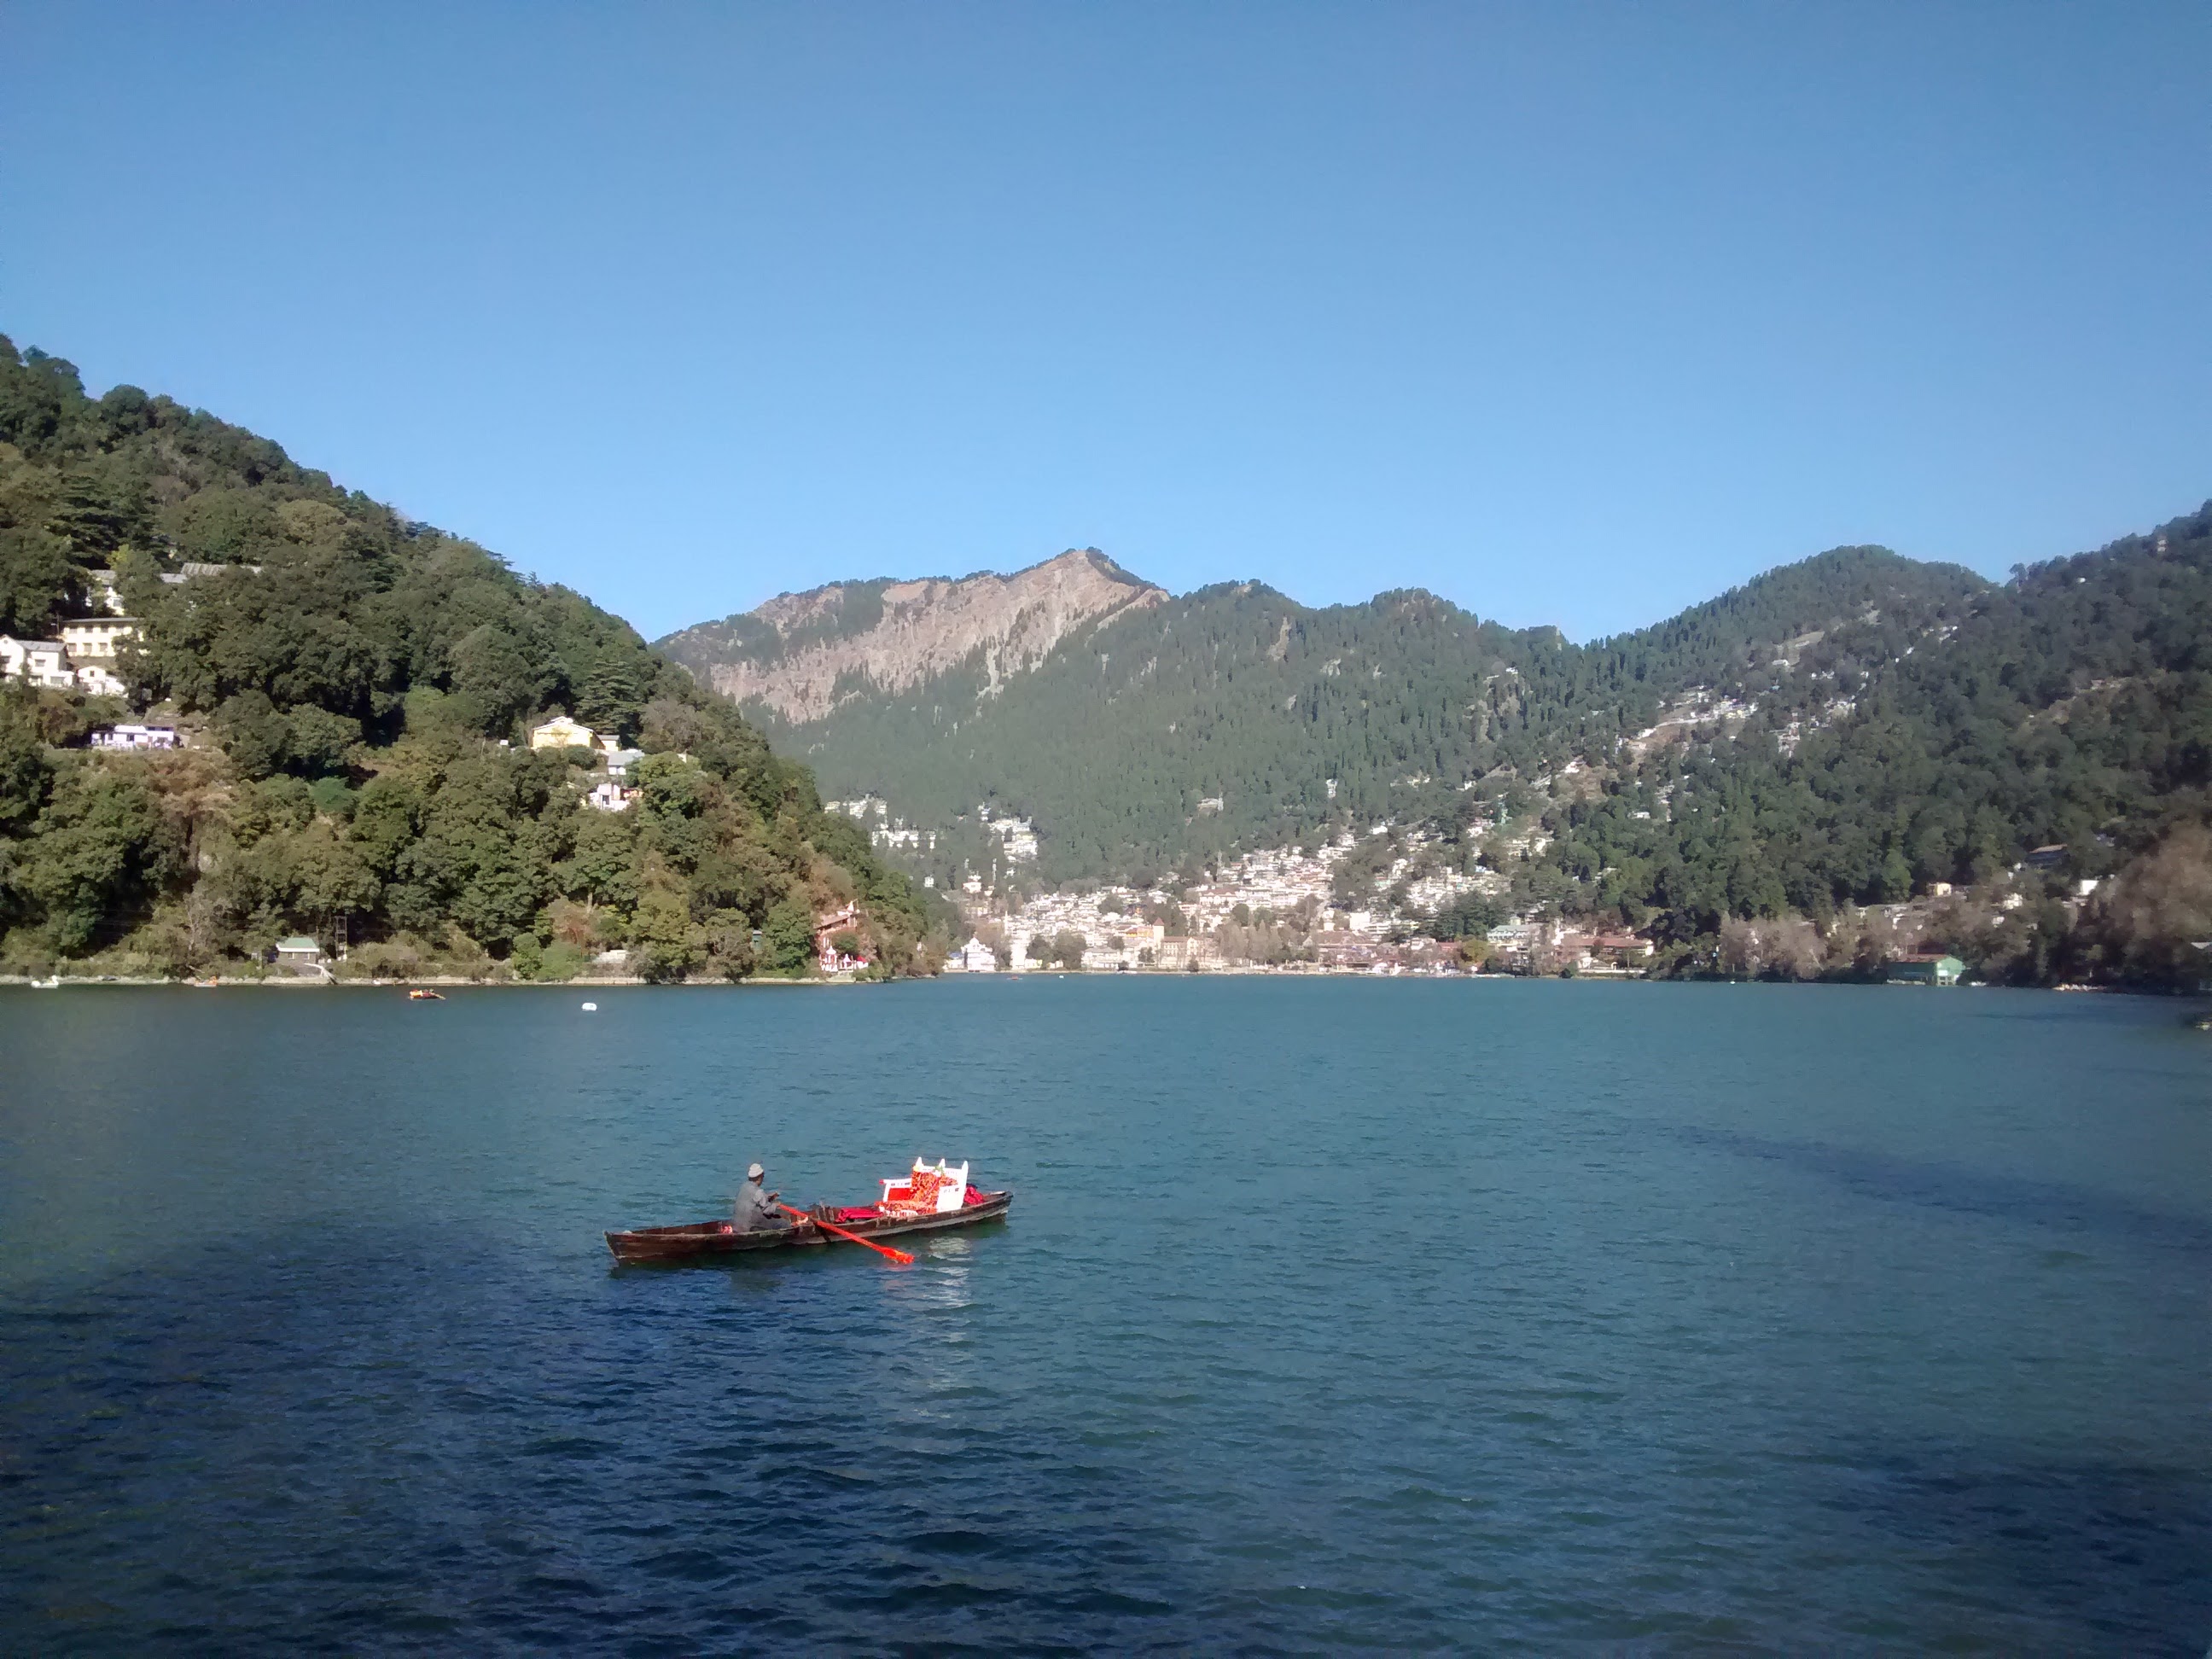 4 Nights 5 Days Nainital Tour Package Gallery